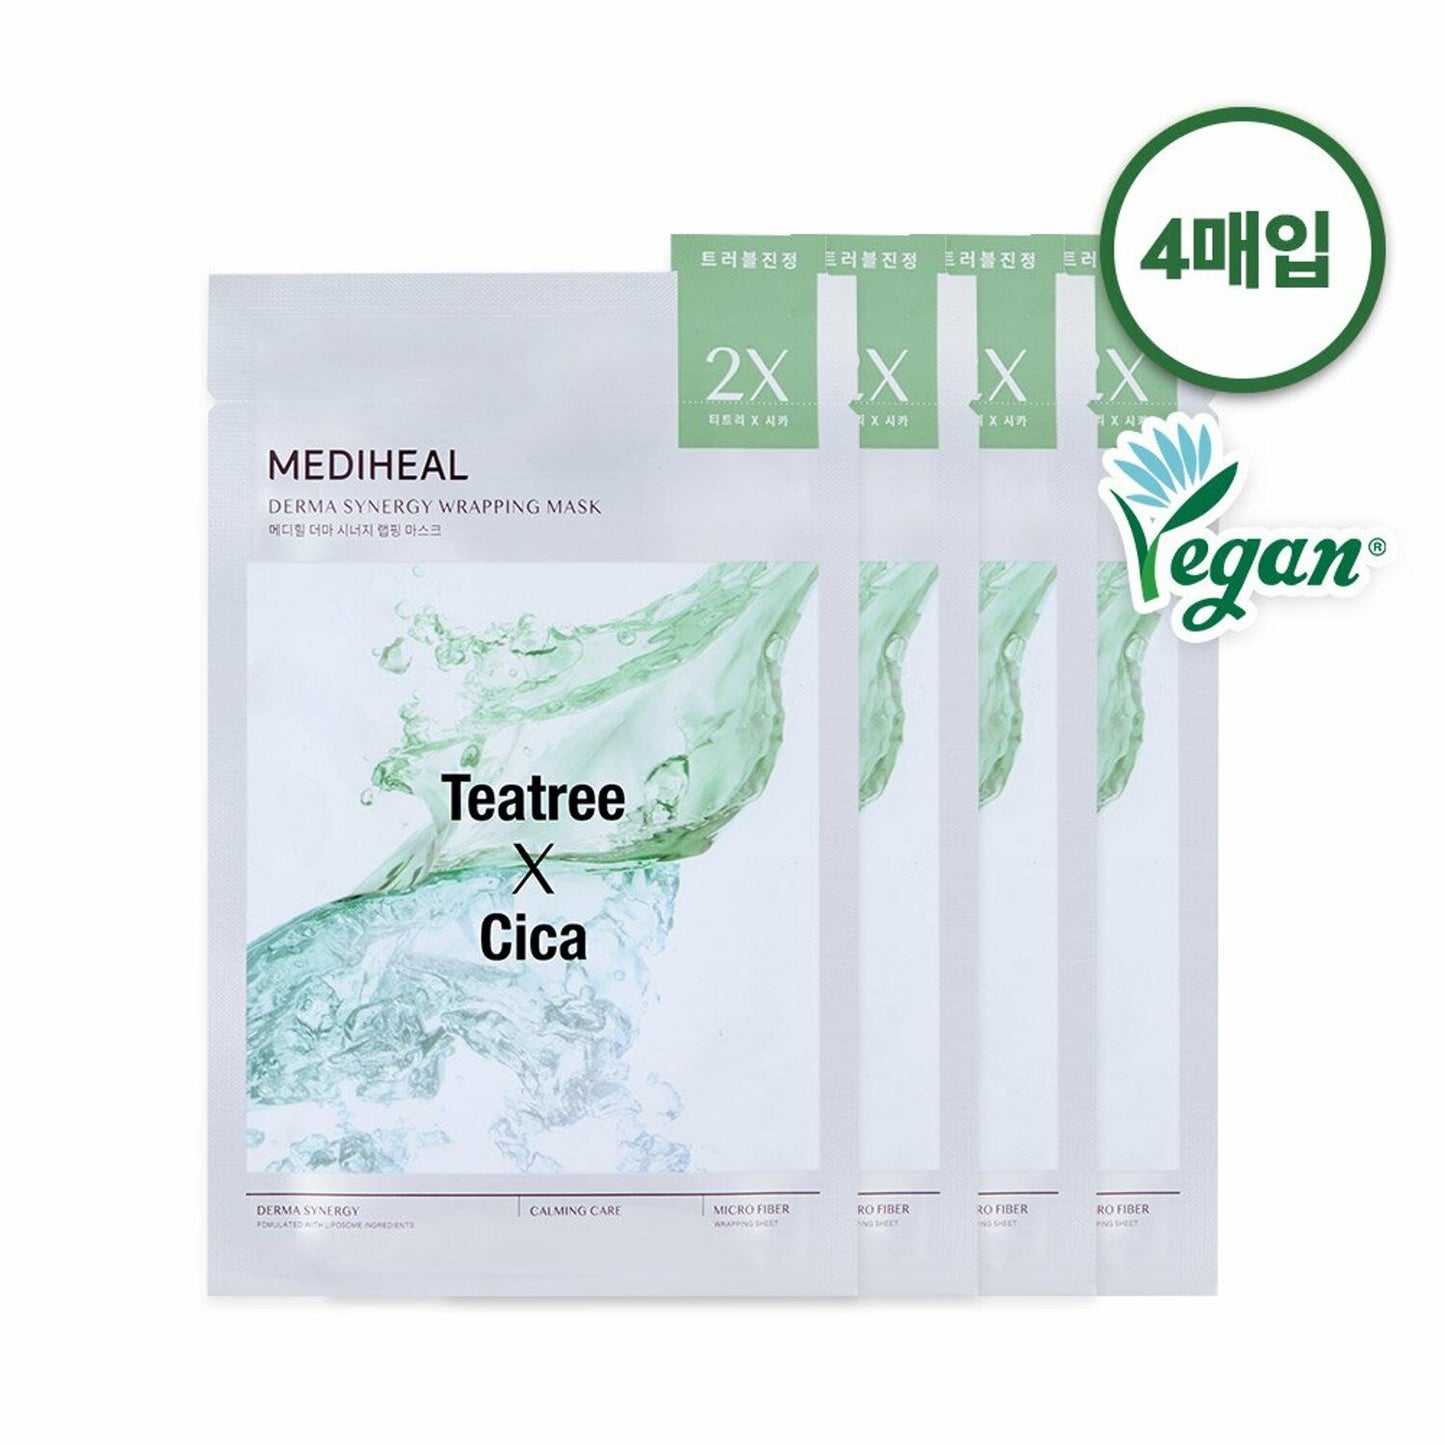 MEDIHEAL Derma Synergy Wrapping Face Mask Sheet for Calming Care 4P